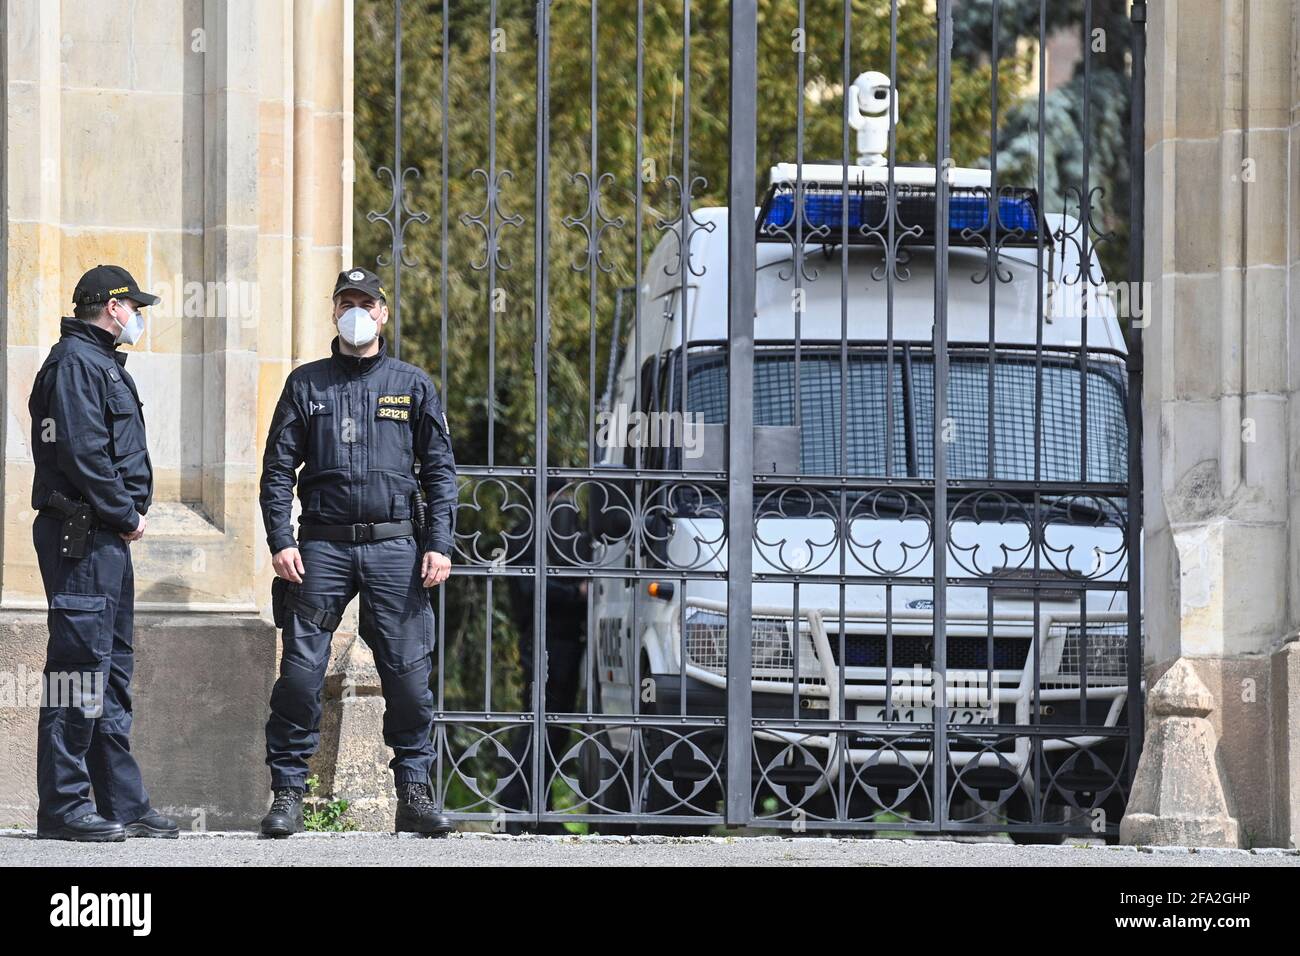 Prague, Czech Republic. 22nd Apr, 2021. Patrol of Czech police in front of  the Embassy of the Russian Federation in Prague, Czech Republic, on  Thursday, April 22, 2021. Russia should allow the